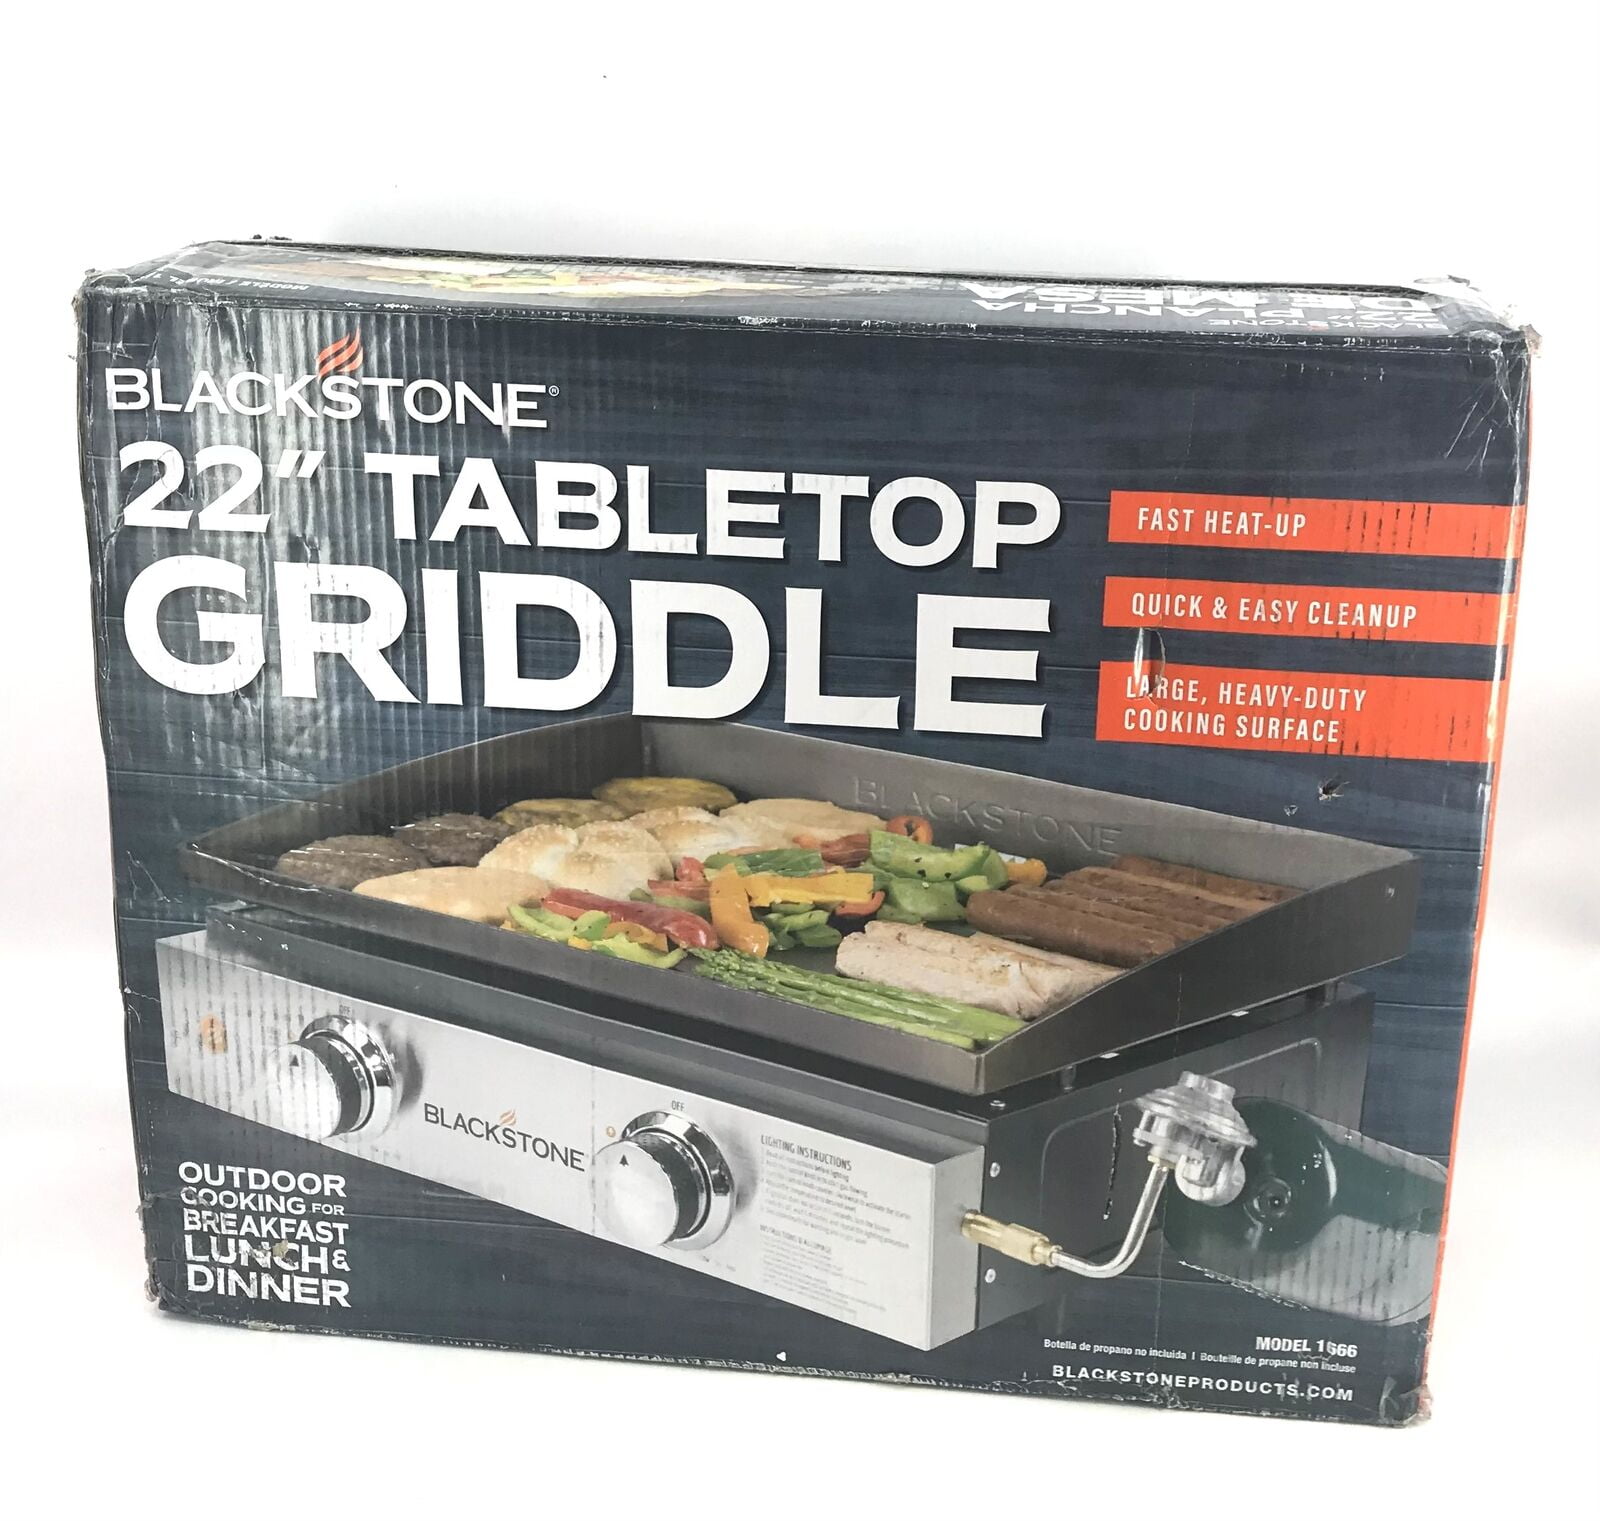  Blackstone Tabletop Griddle, 1666, Heavy Duty Flat Top Griddle  Grill Station for Camping, Camp, Outdoor, Tailgating, Tabletop – Stainless  Steel Griddle with Knobs & Ignition, Black, 22 inch : Everything Else